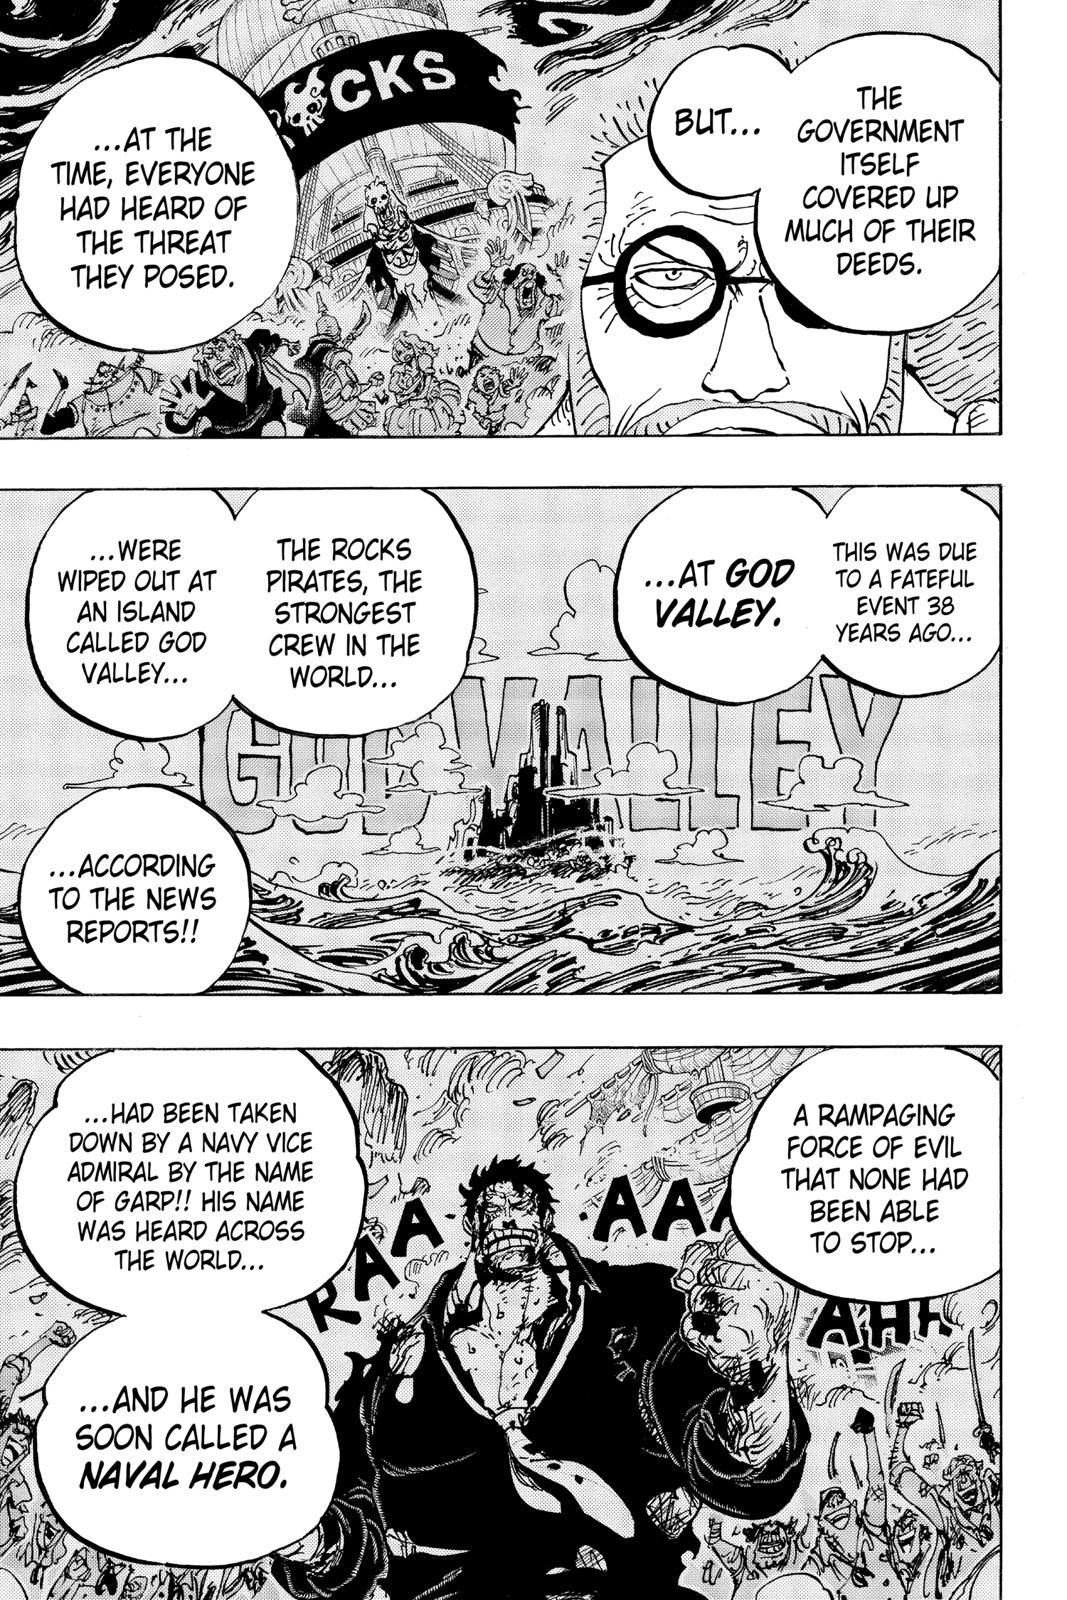 One Piece: How Much Would Kozuki Oden's Bounty Have Been?